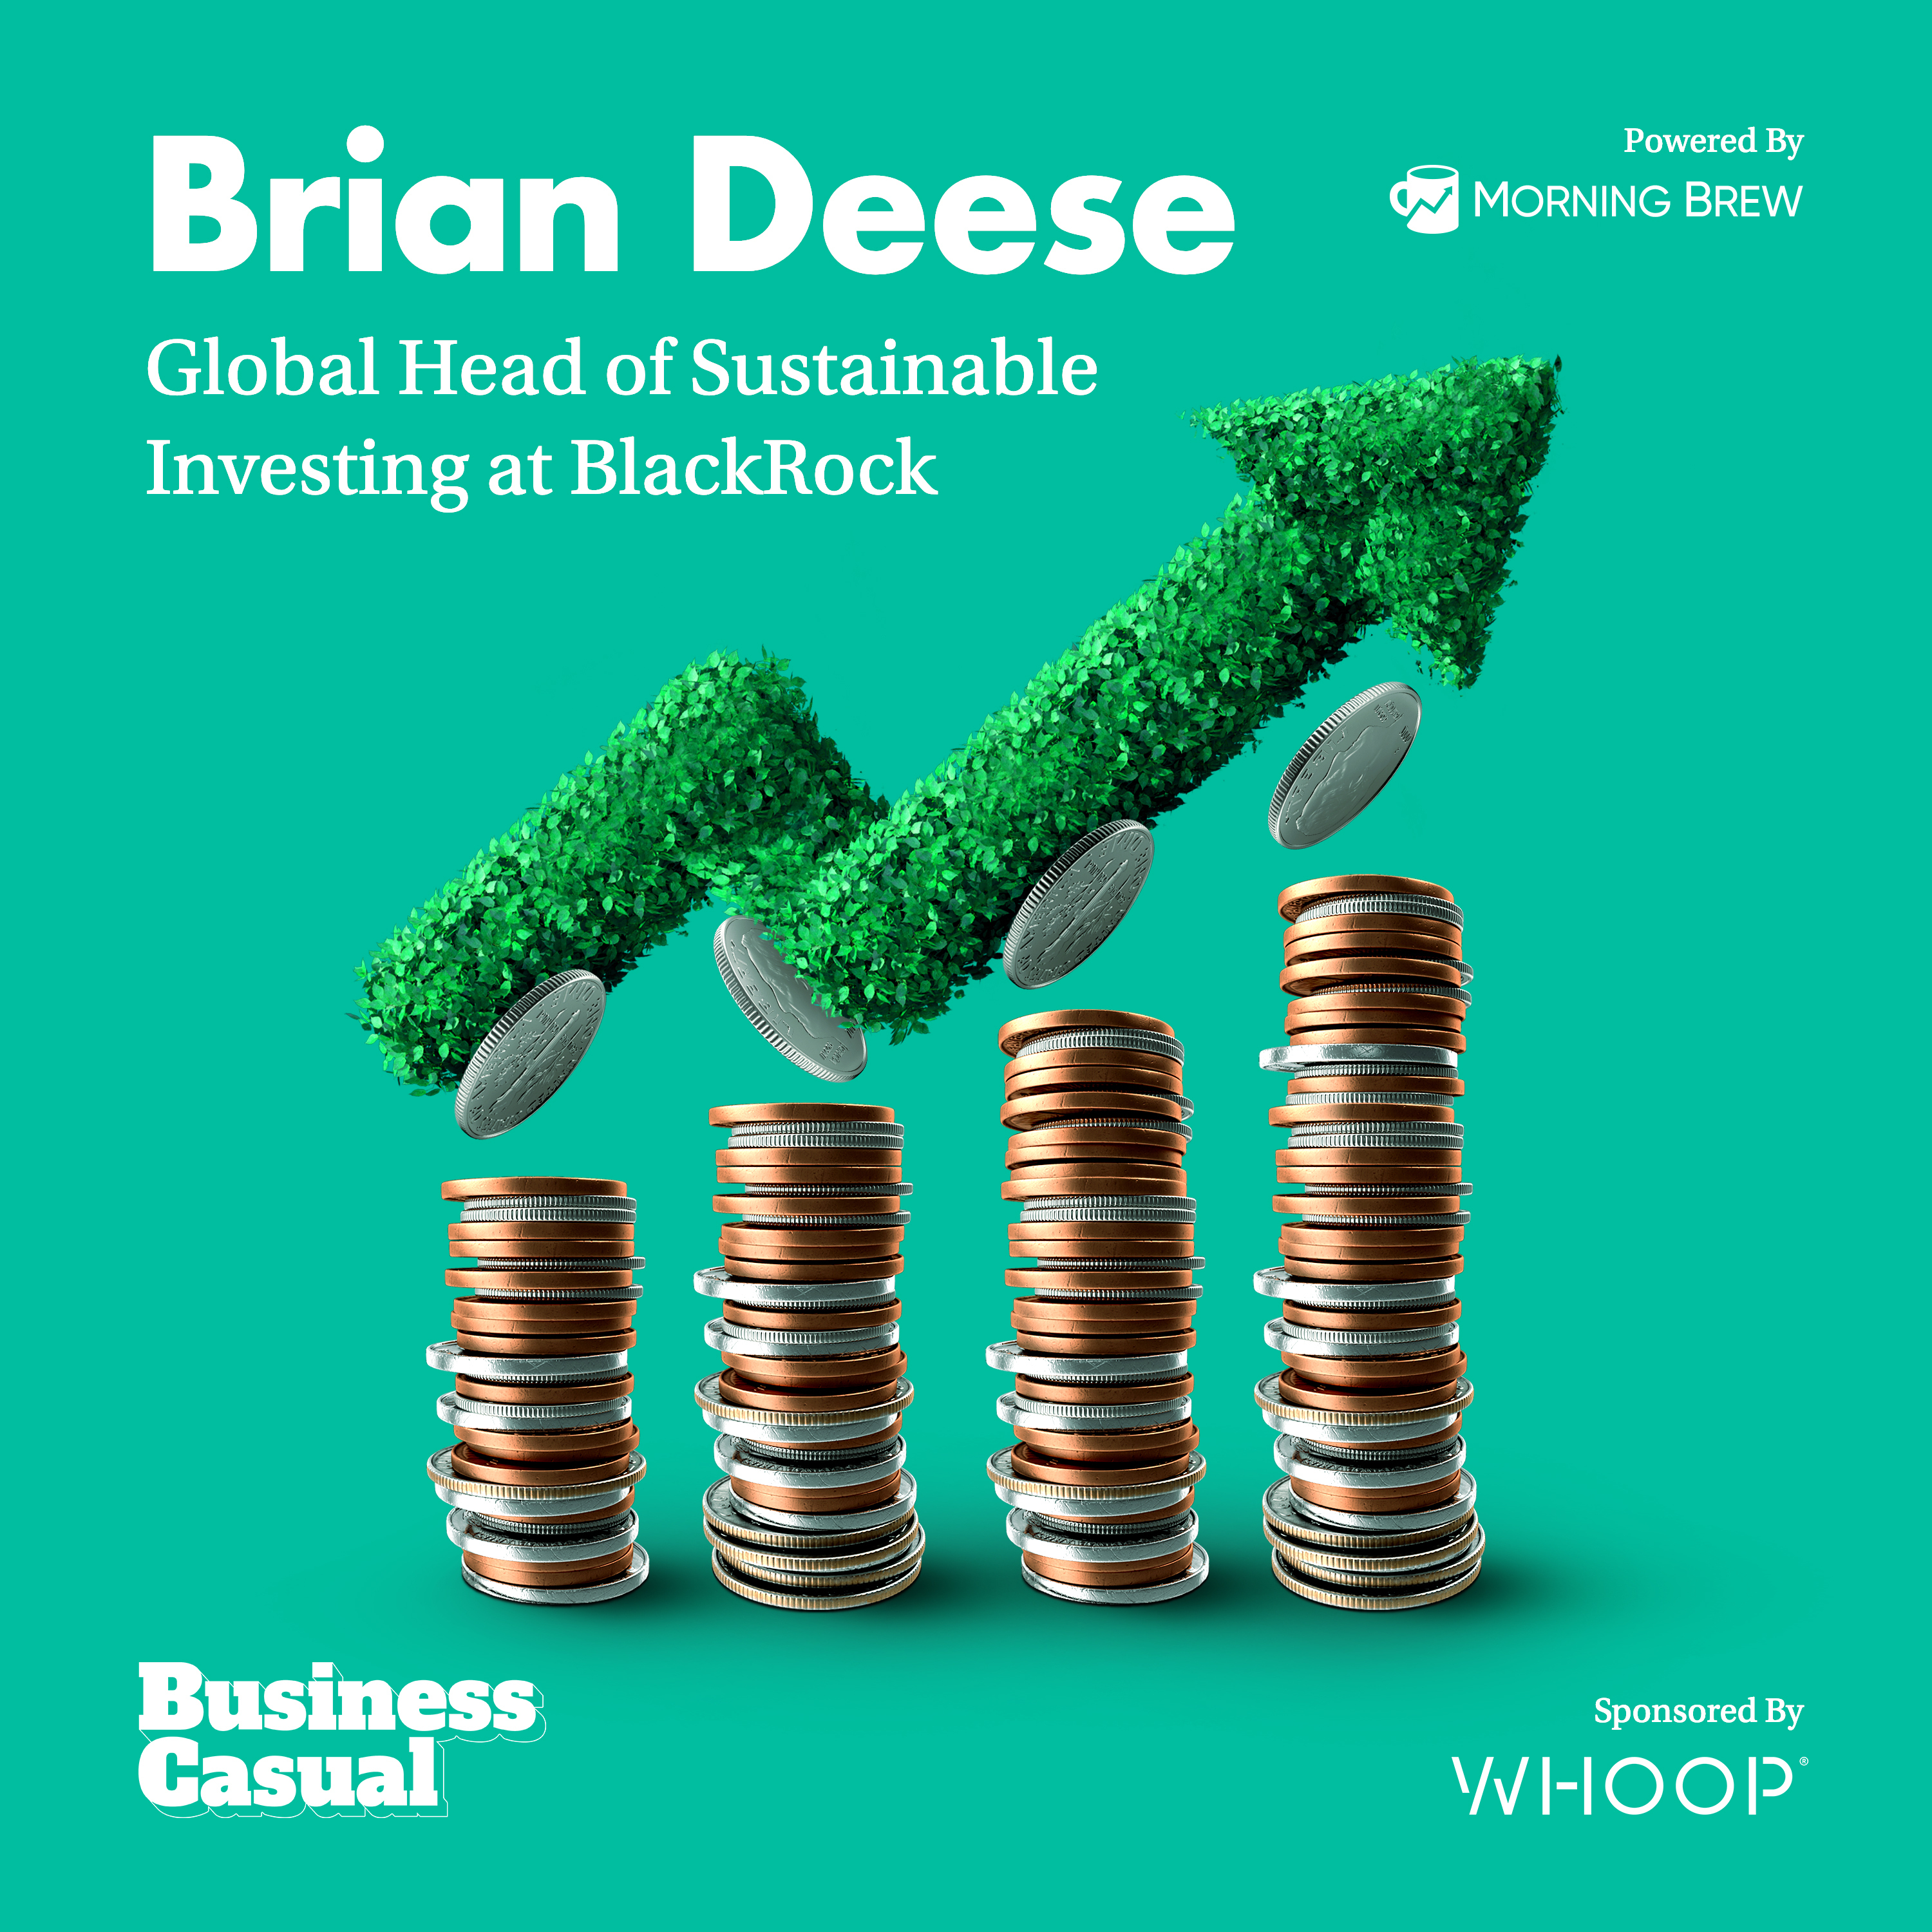 The Green Investing Revolution Is Coming: BlackRock's Brian Deese on ESG Investing Image